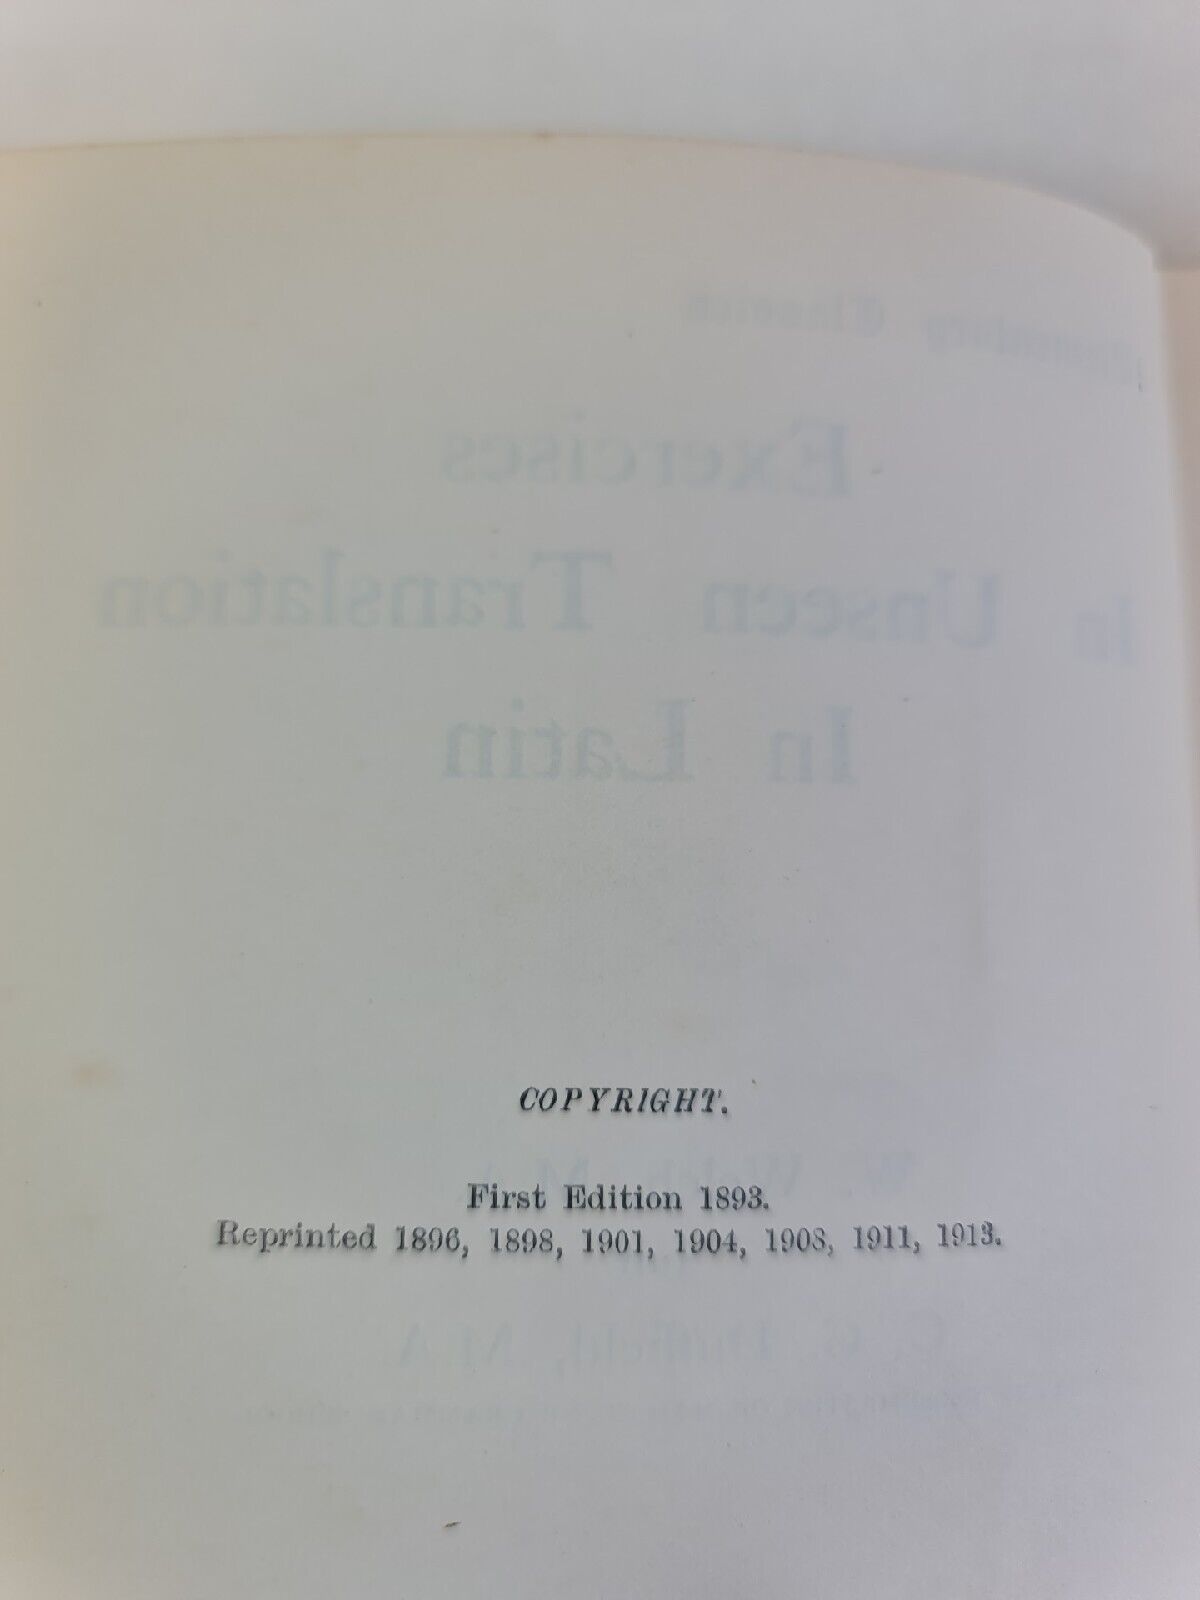 Exercises in Unseen Translation in Latin by W Welch (1913)